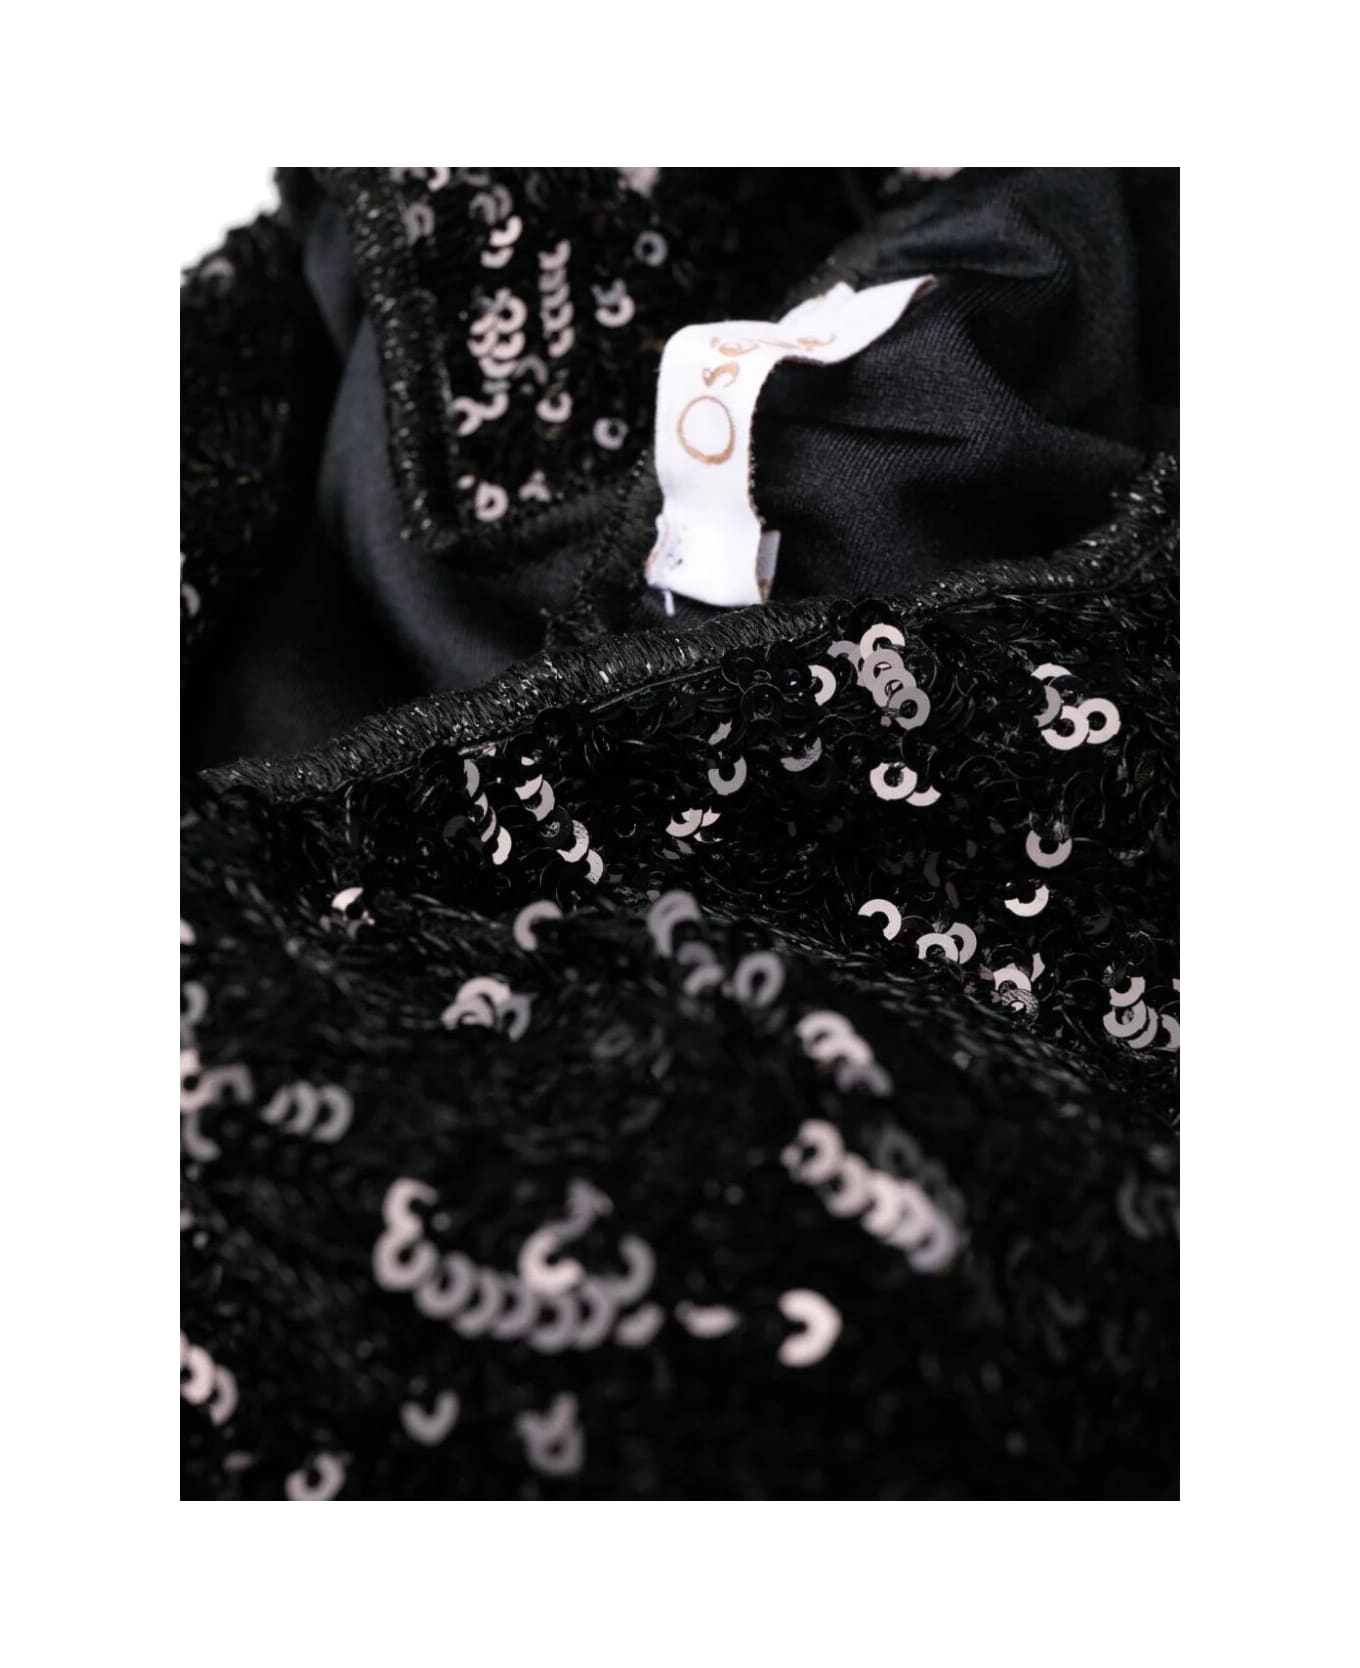 Oseree Body Paillettes - Black ボディスーツ